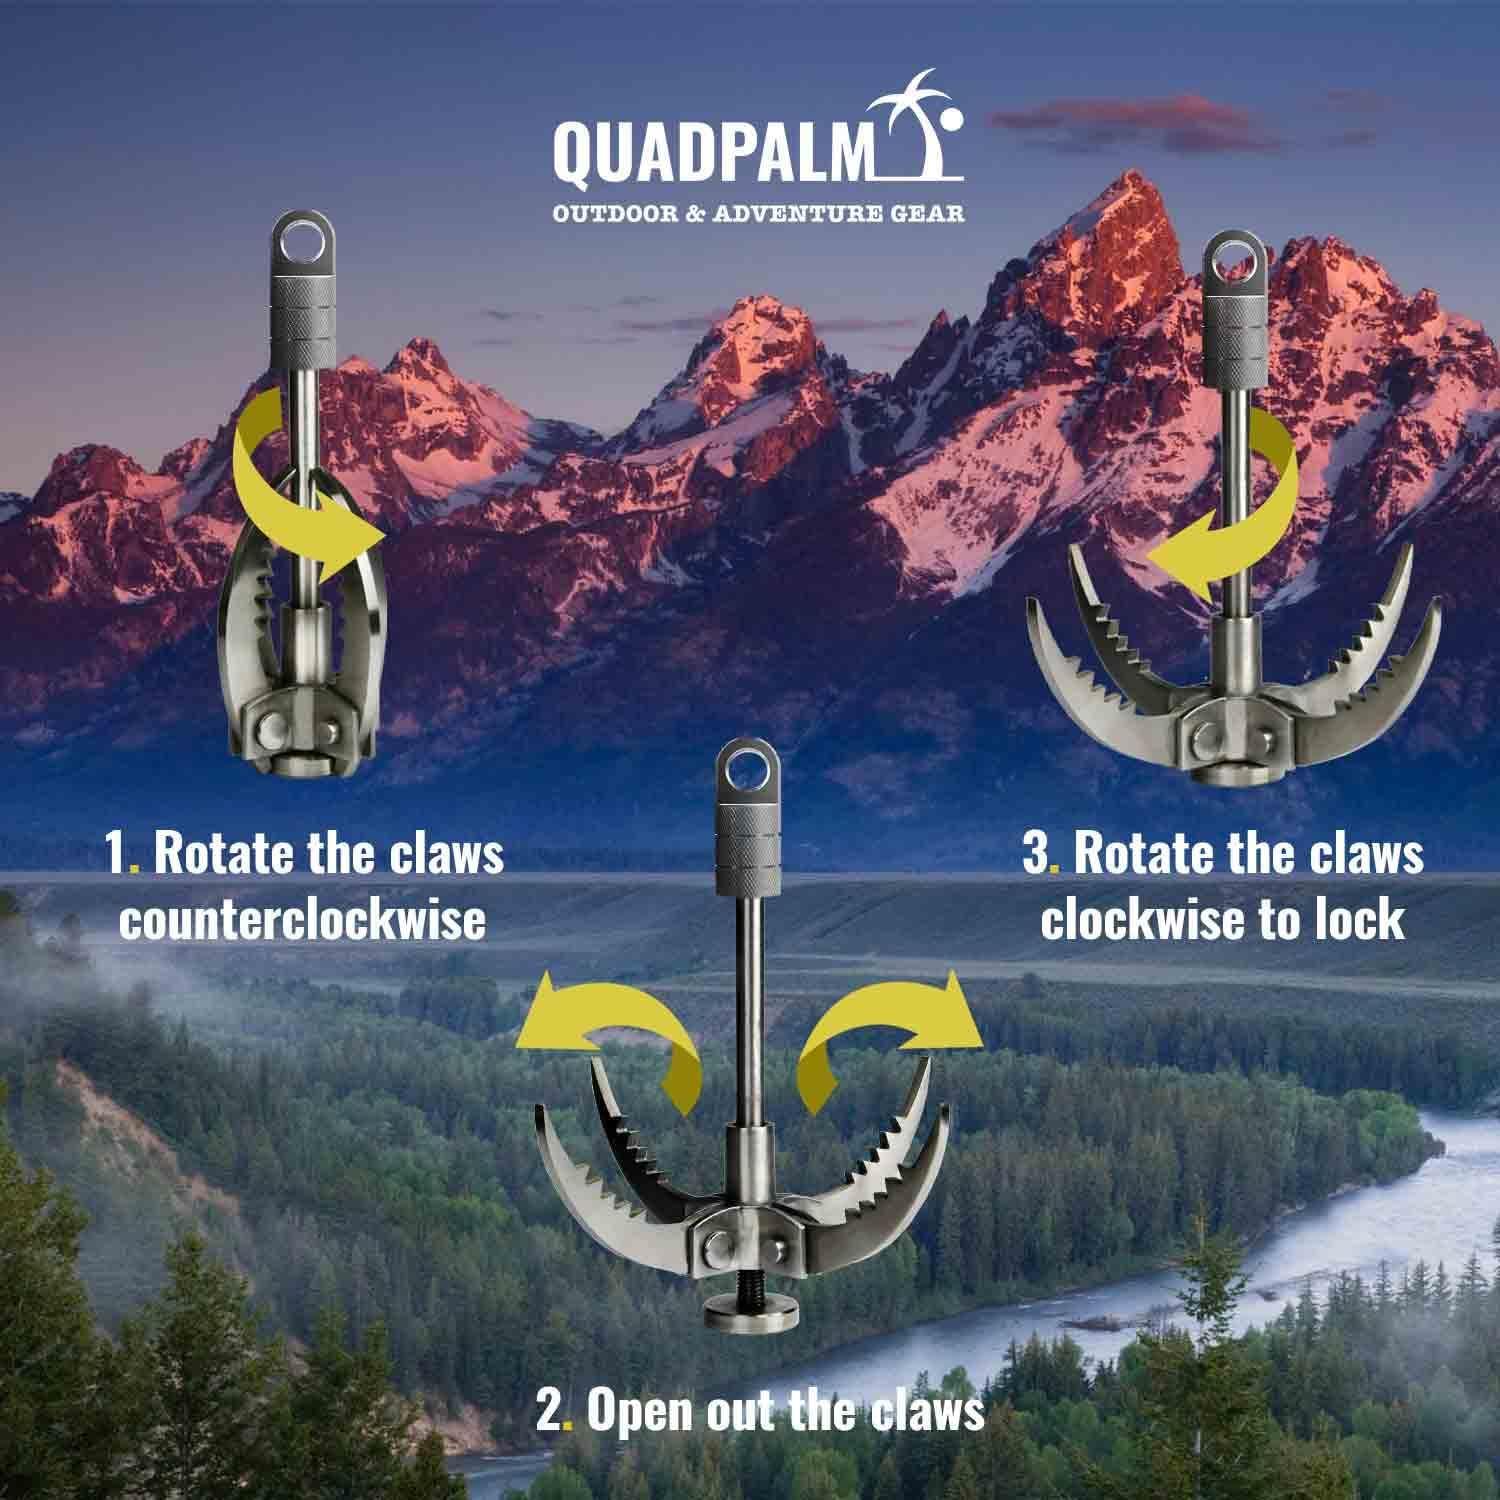 QUADPALM Grappling Hook and Rope 10M (32ft) - Multifunctional Heavy Duty  Survival Hook - 4 Stainless Steel Folding Claws - Survival Gear - Outdoors  Camping Hiking blue